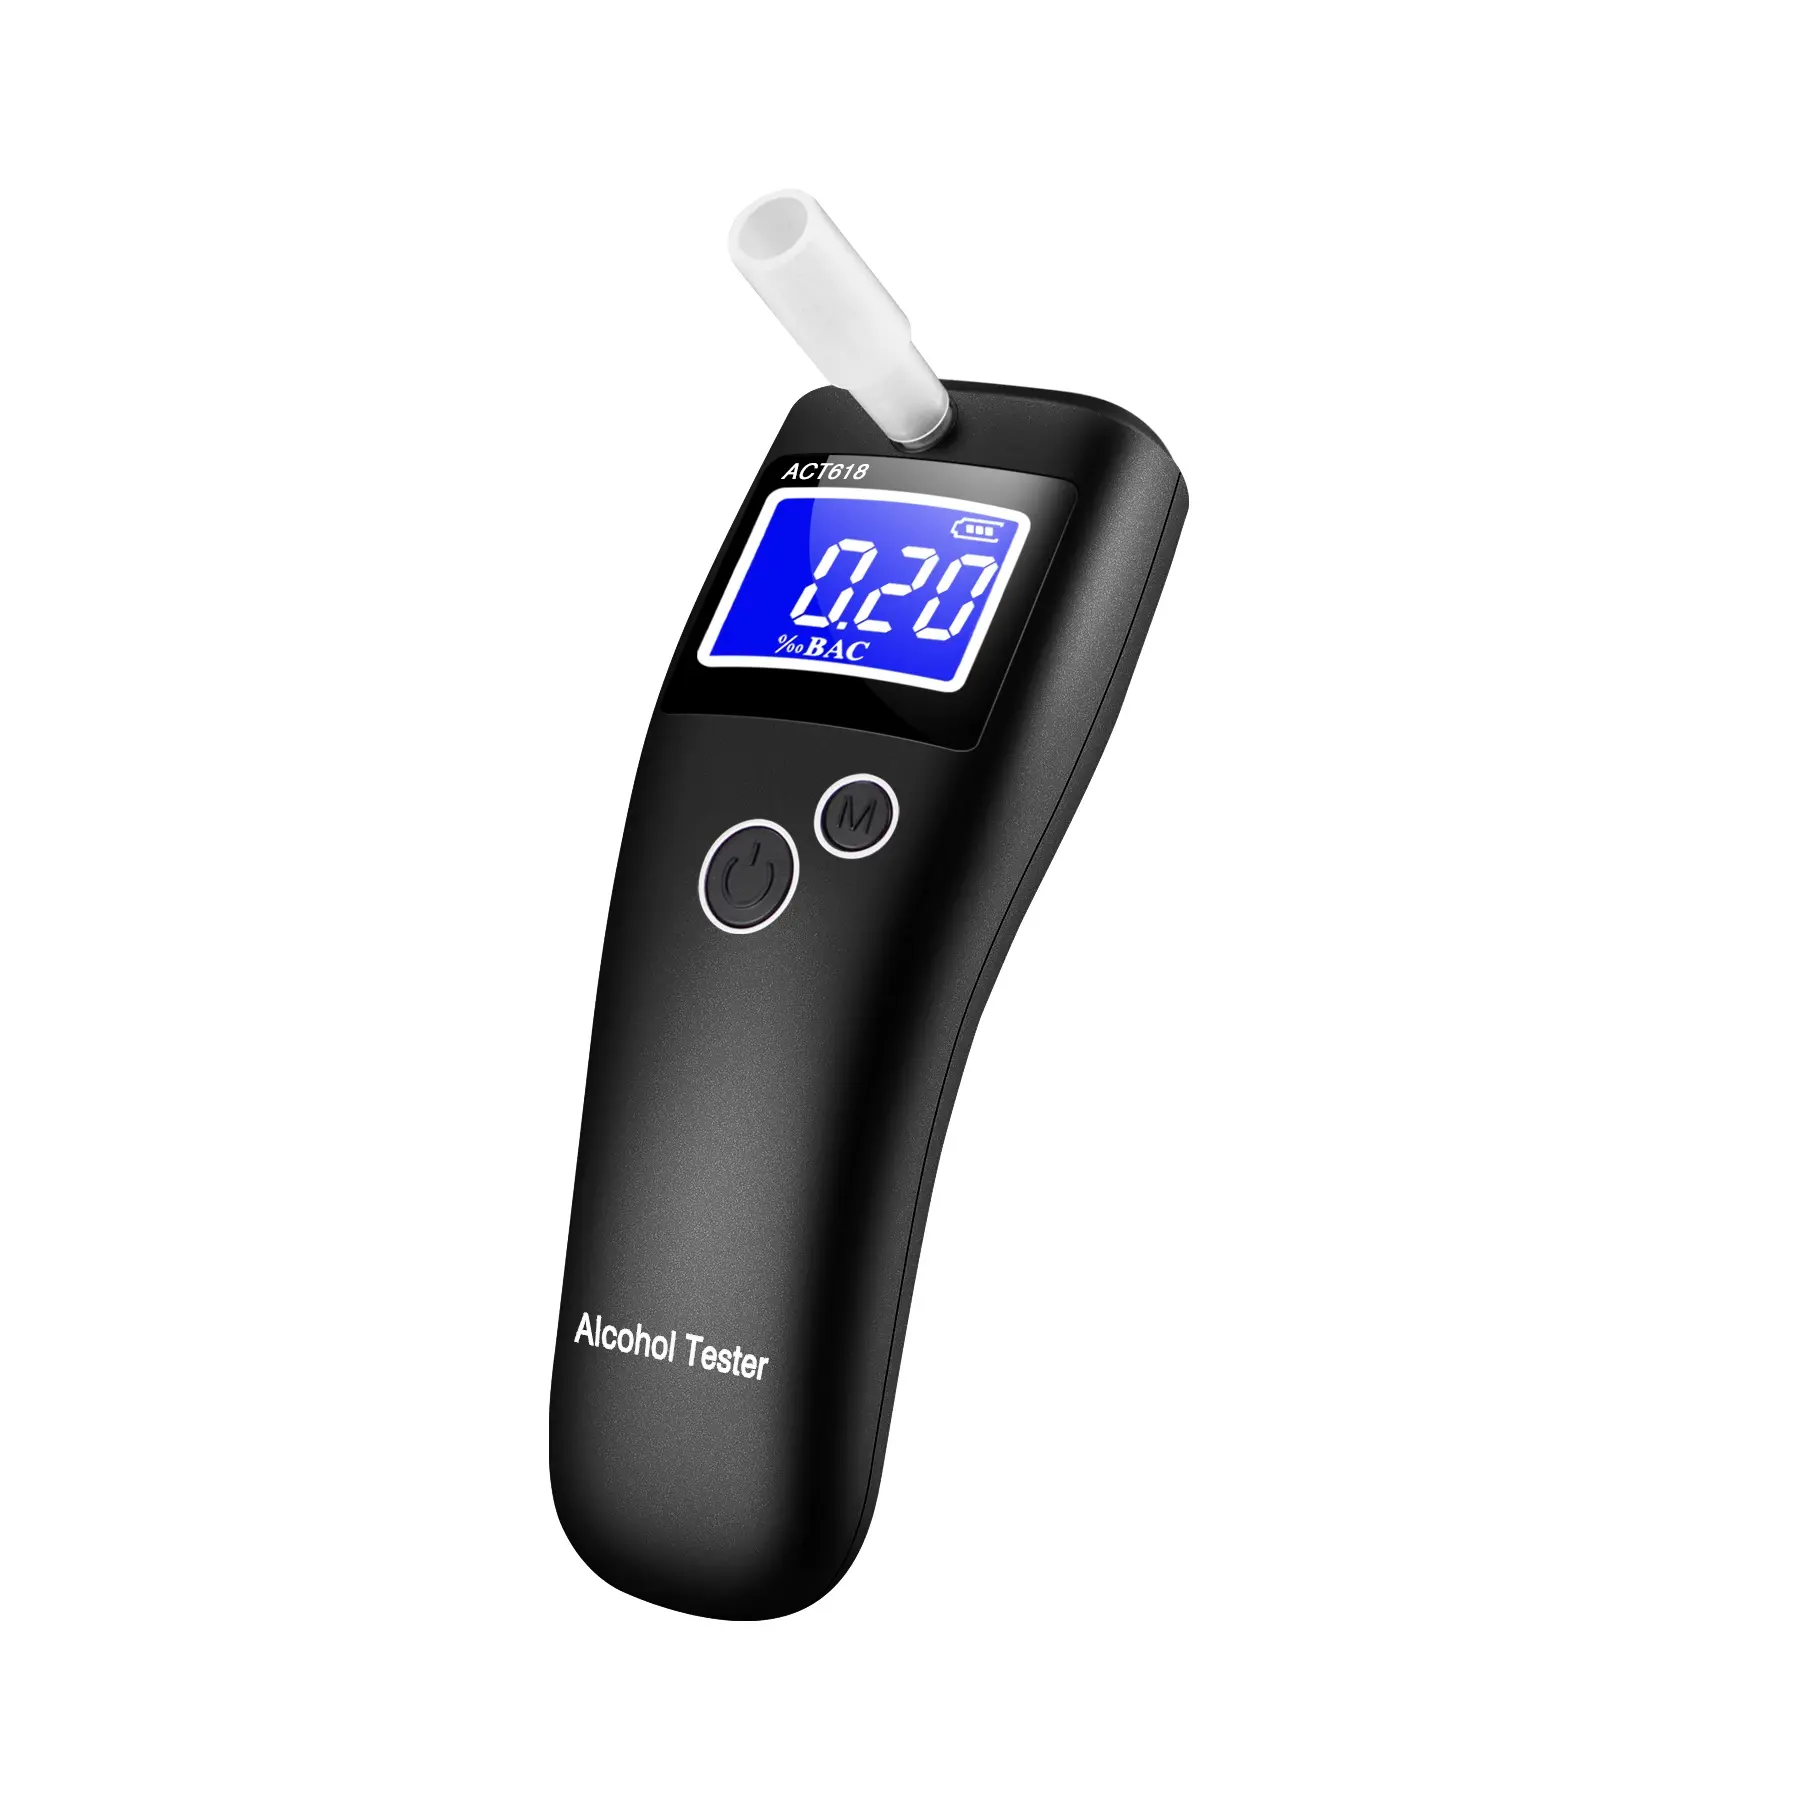 New style blowing dynamic monitoring digital display alcohol test analyzer